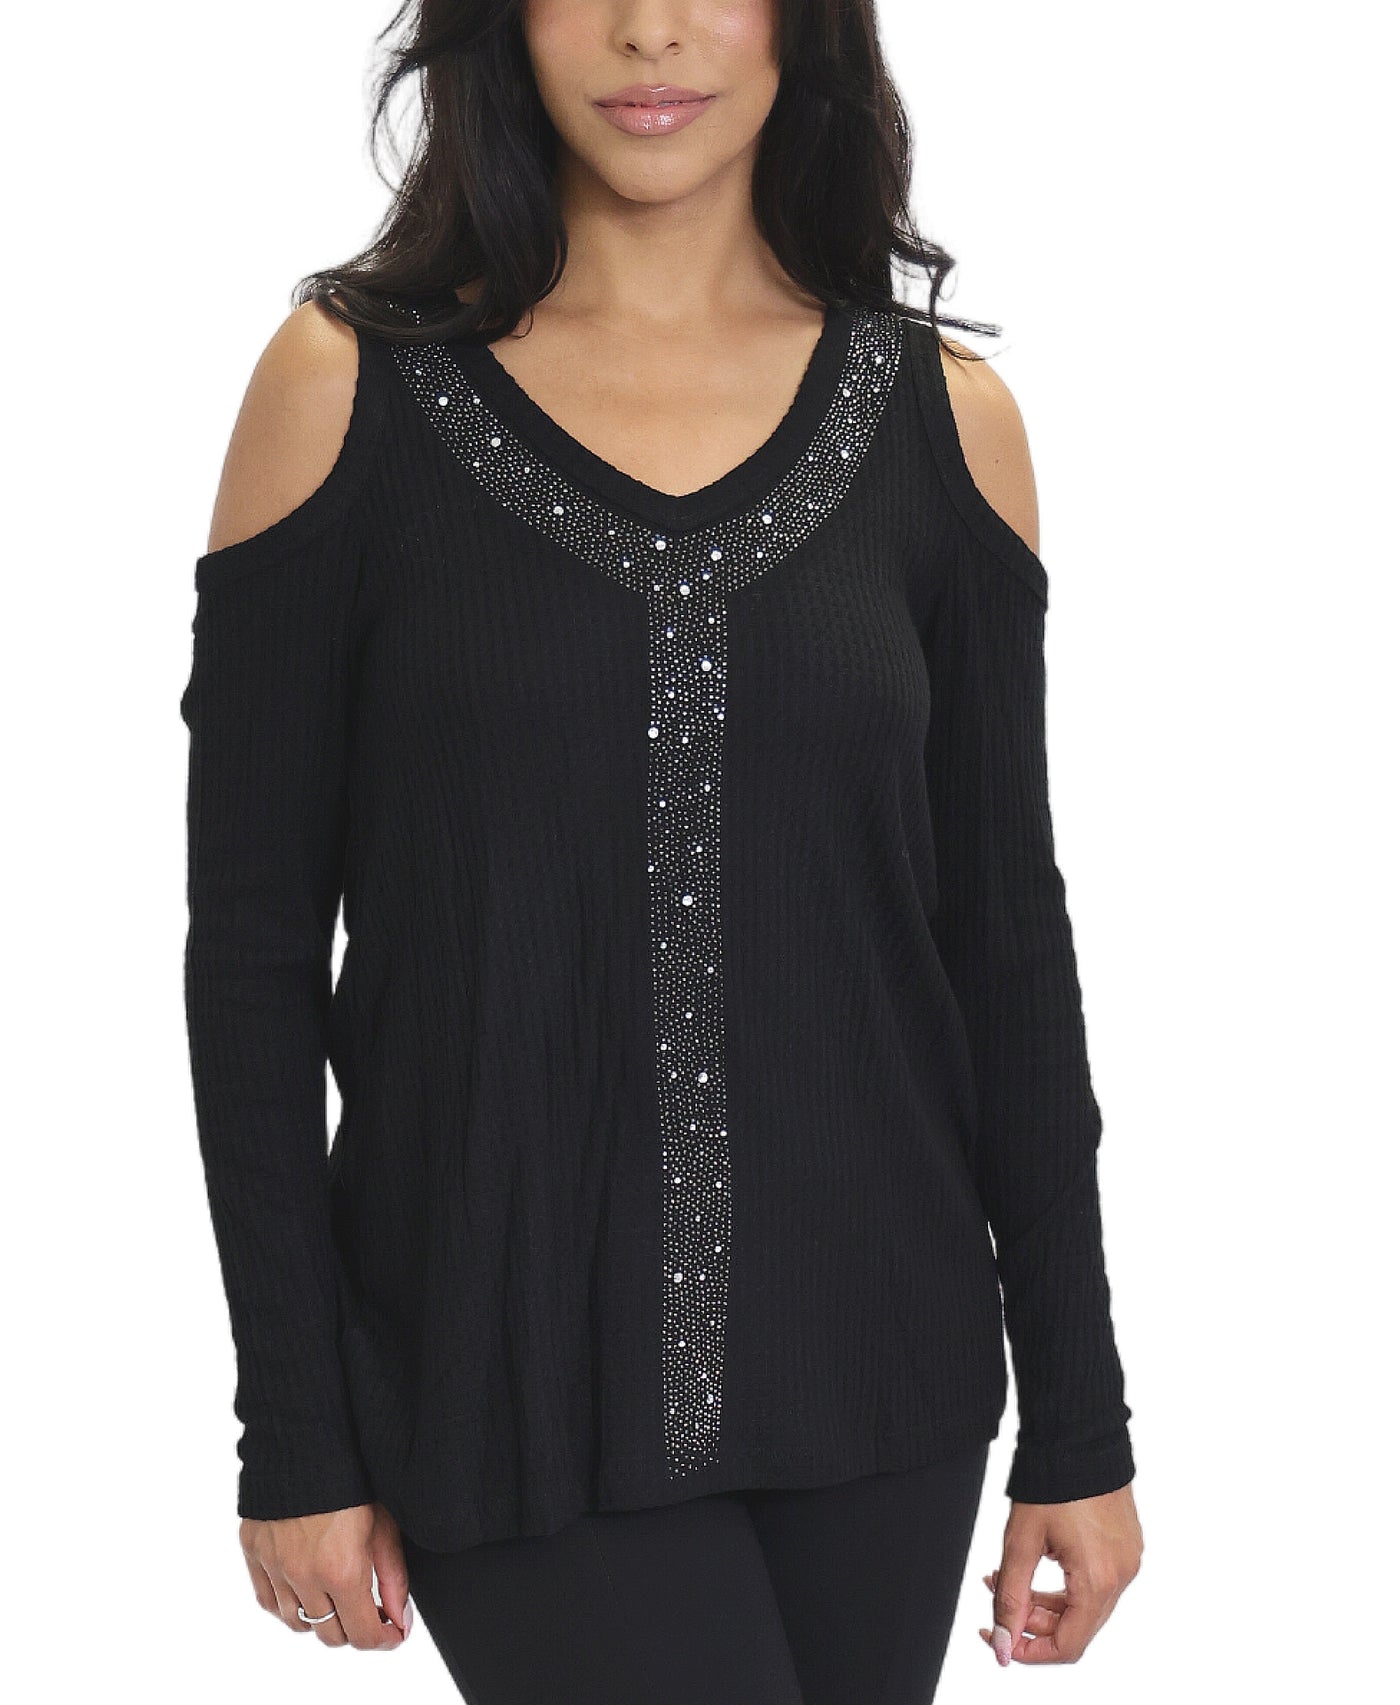 Waffle Knit Top w/ Crystals image 1